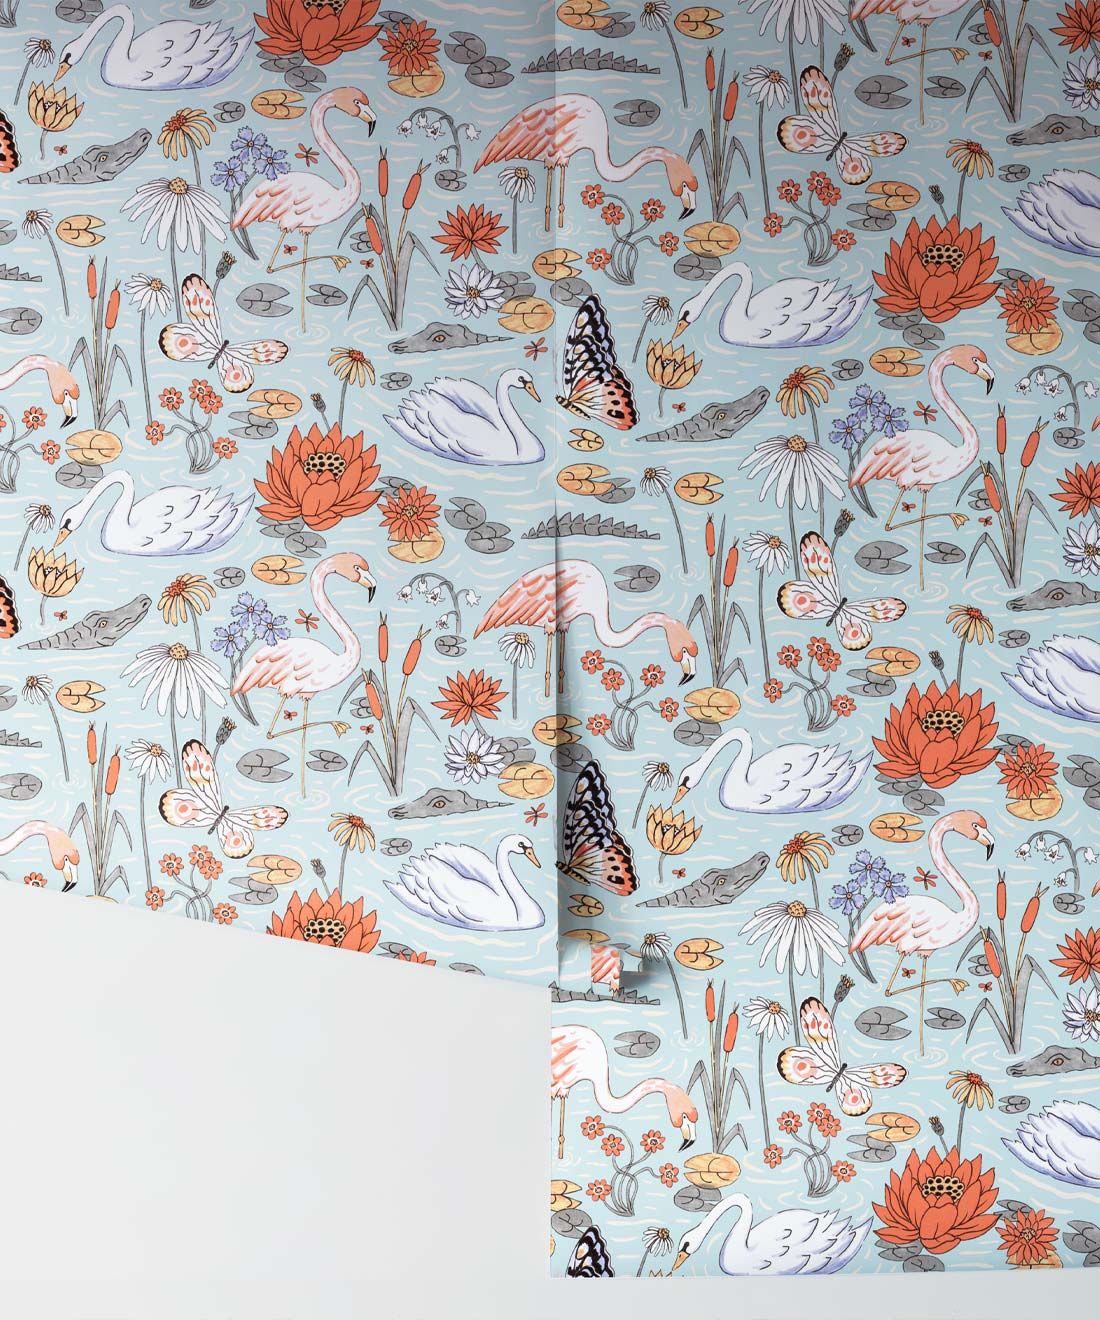 Pond Pattern Wallpaper featuring alligators, swans, flamingos and lily pads • Light • Rolls